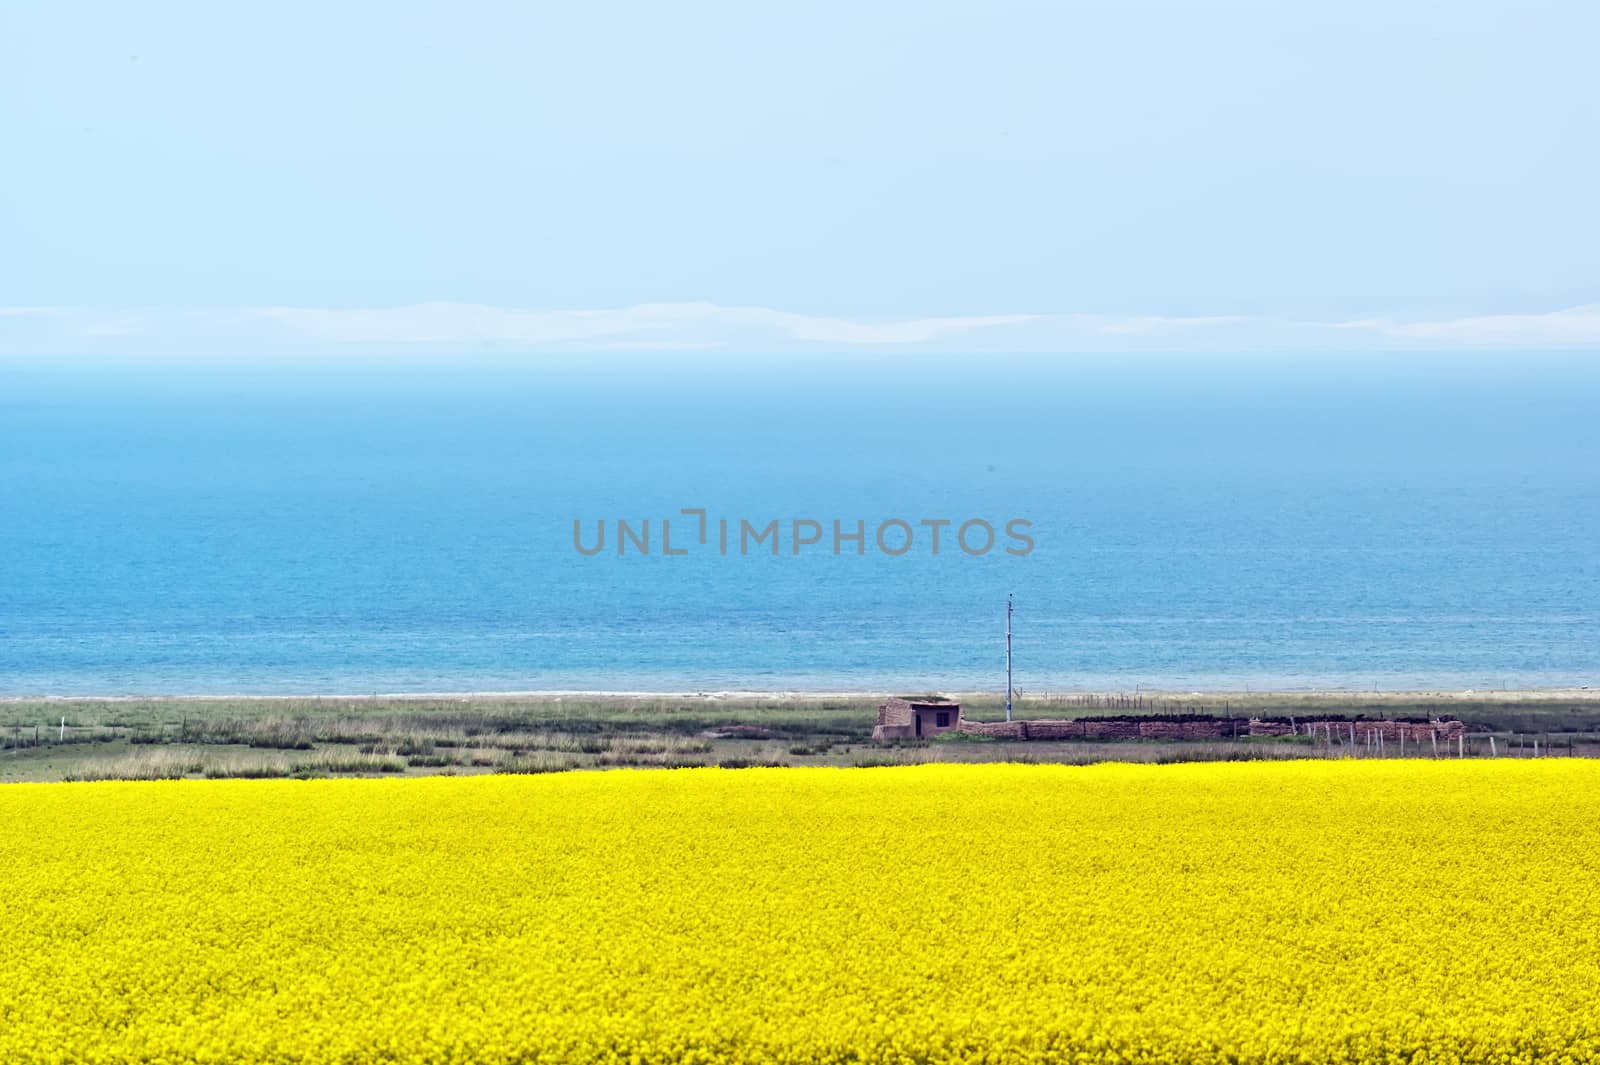 Barley and canola flower fields by xfdly5